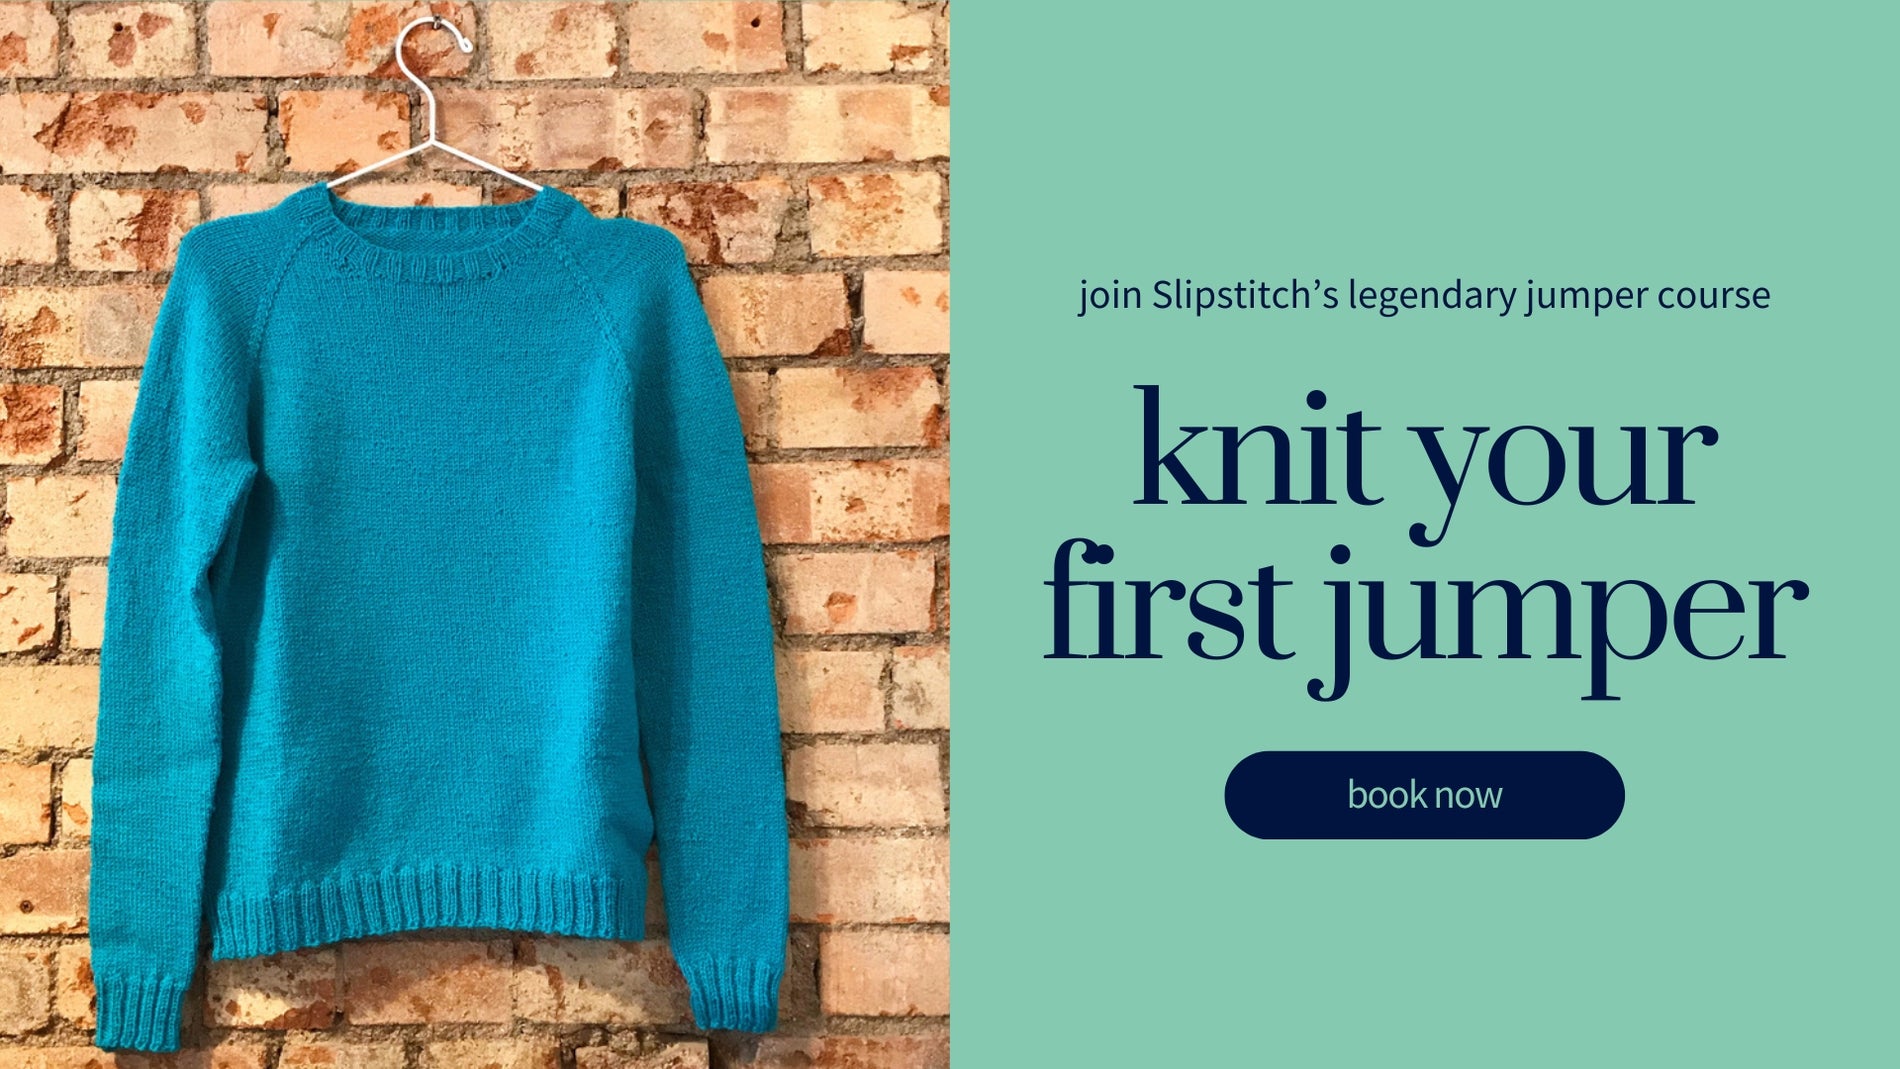 23 11 07 knit your first jumper website banner 1920 x 1080 px